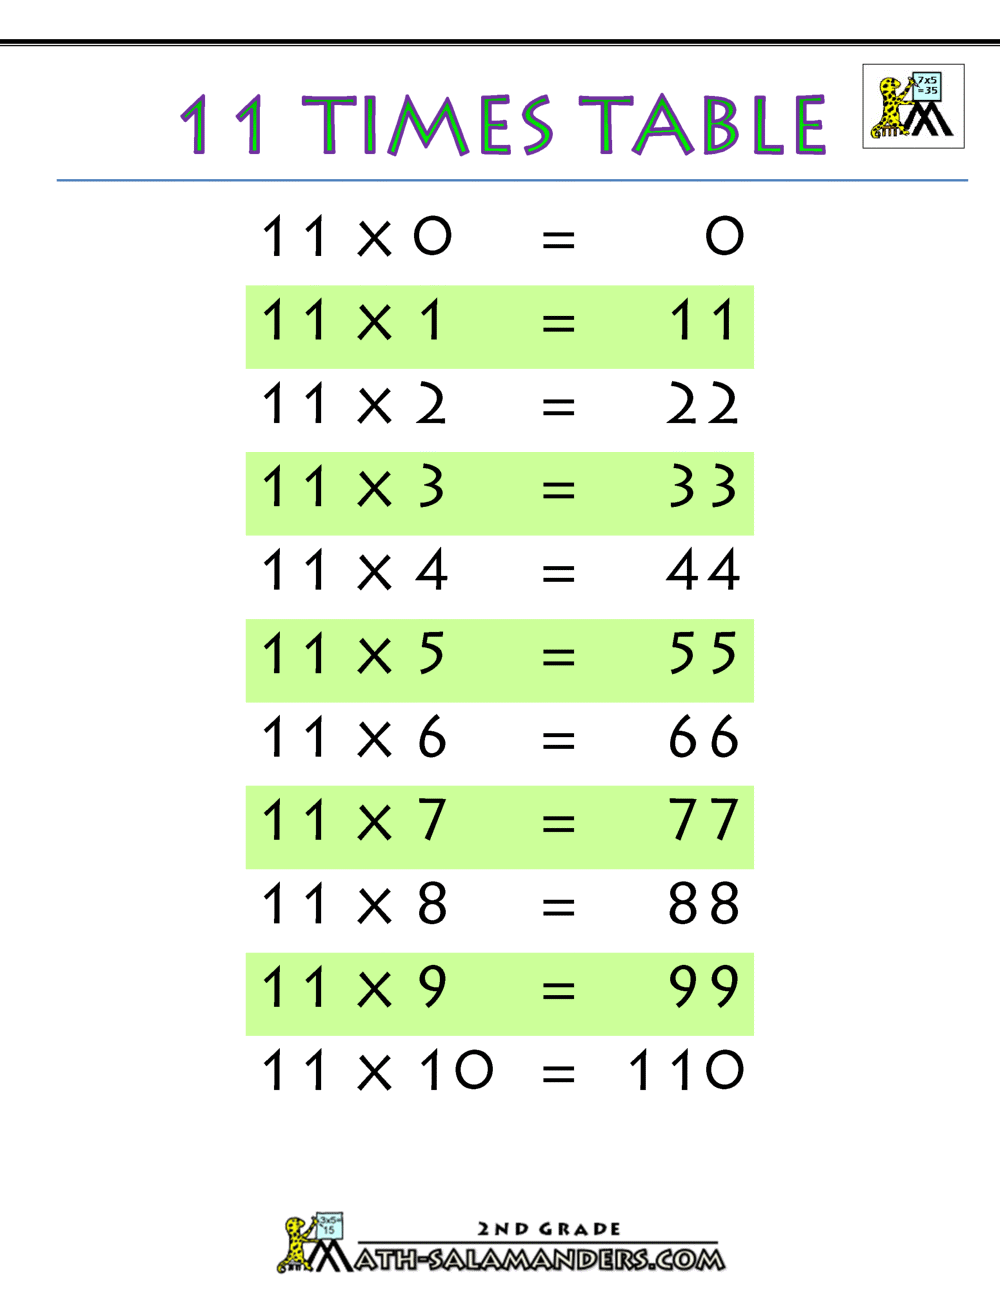 11-times-table